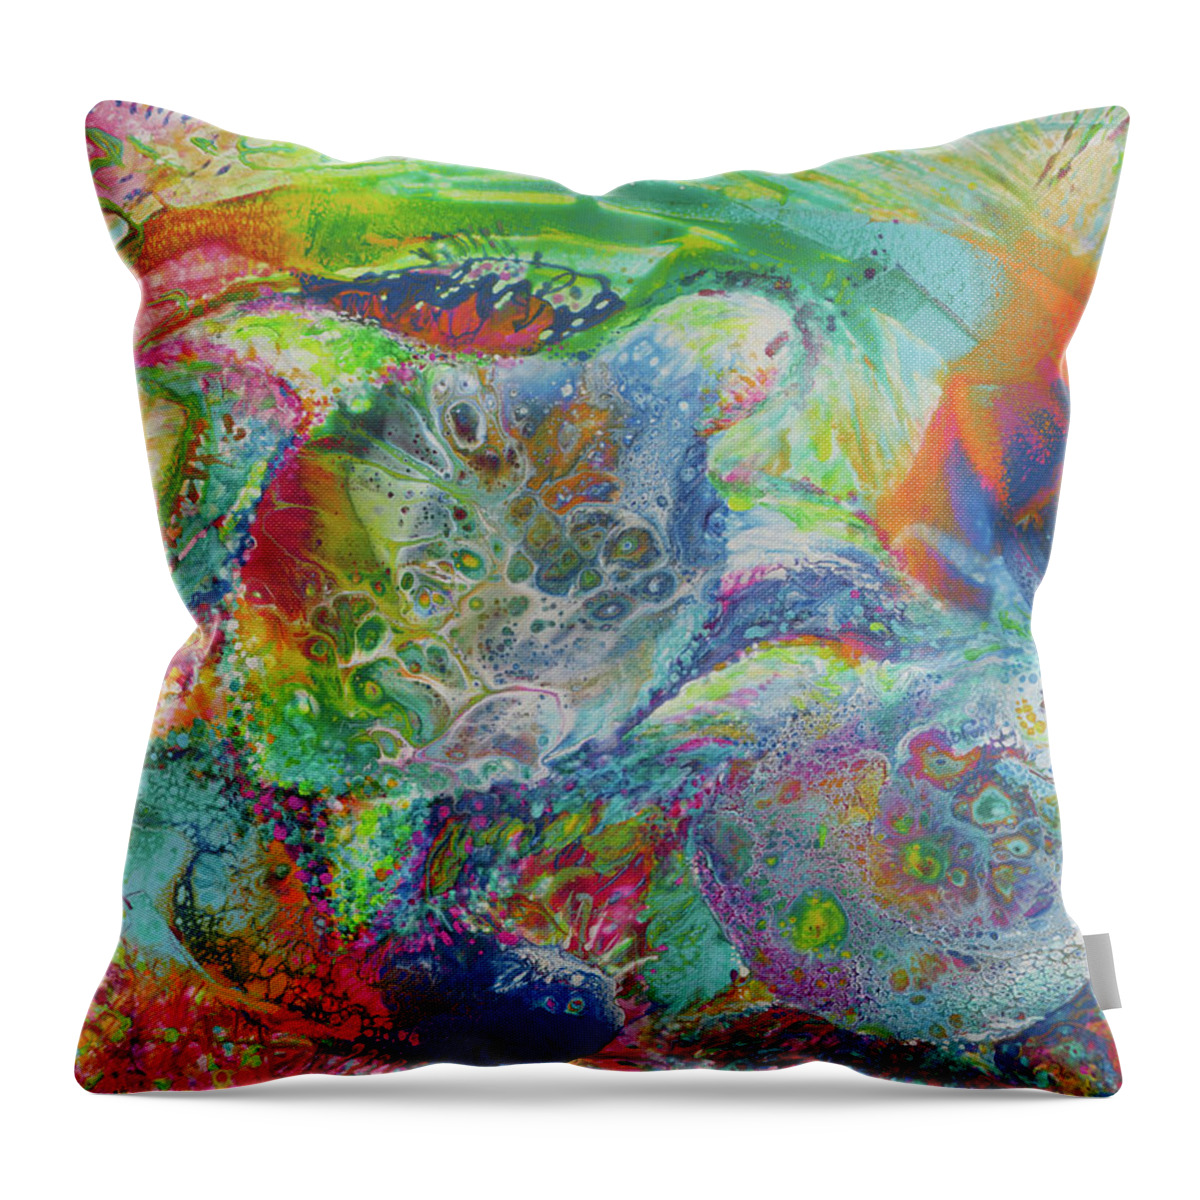 Turtle Throw Pillow featuring the painting Turtle Festival by Julie Turner